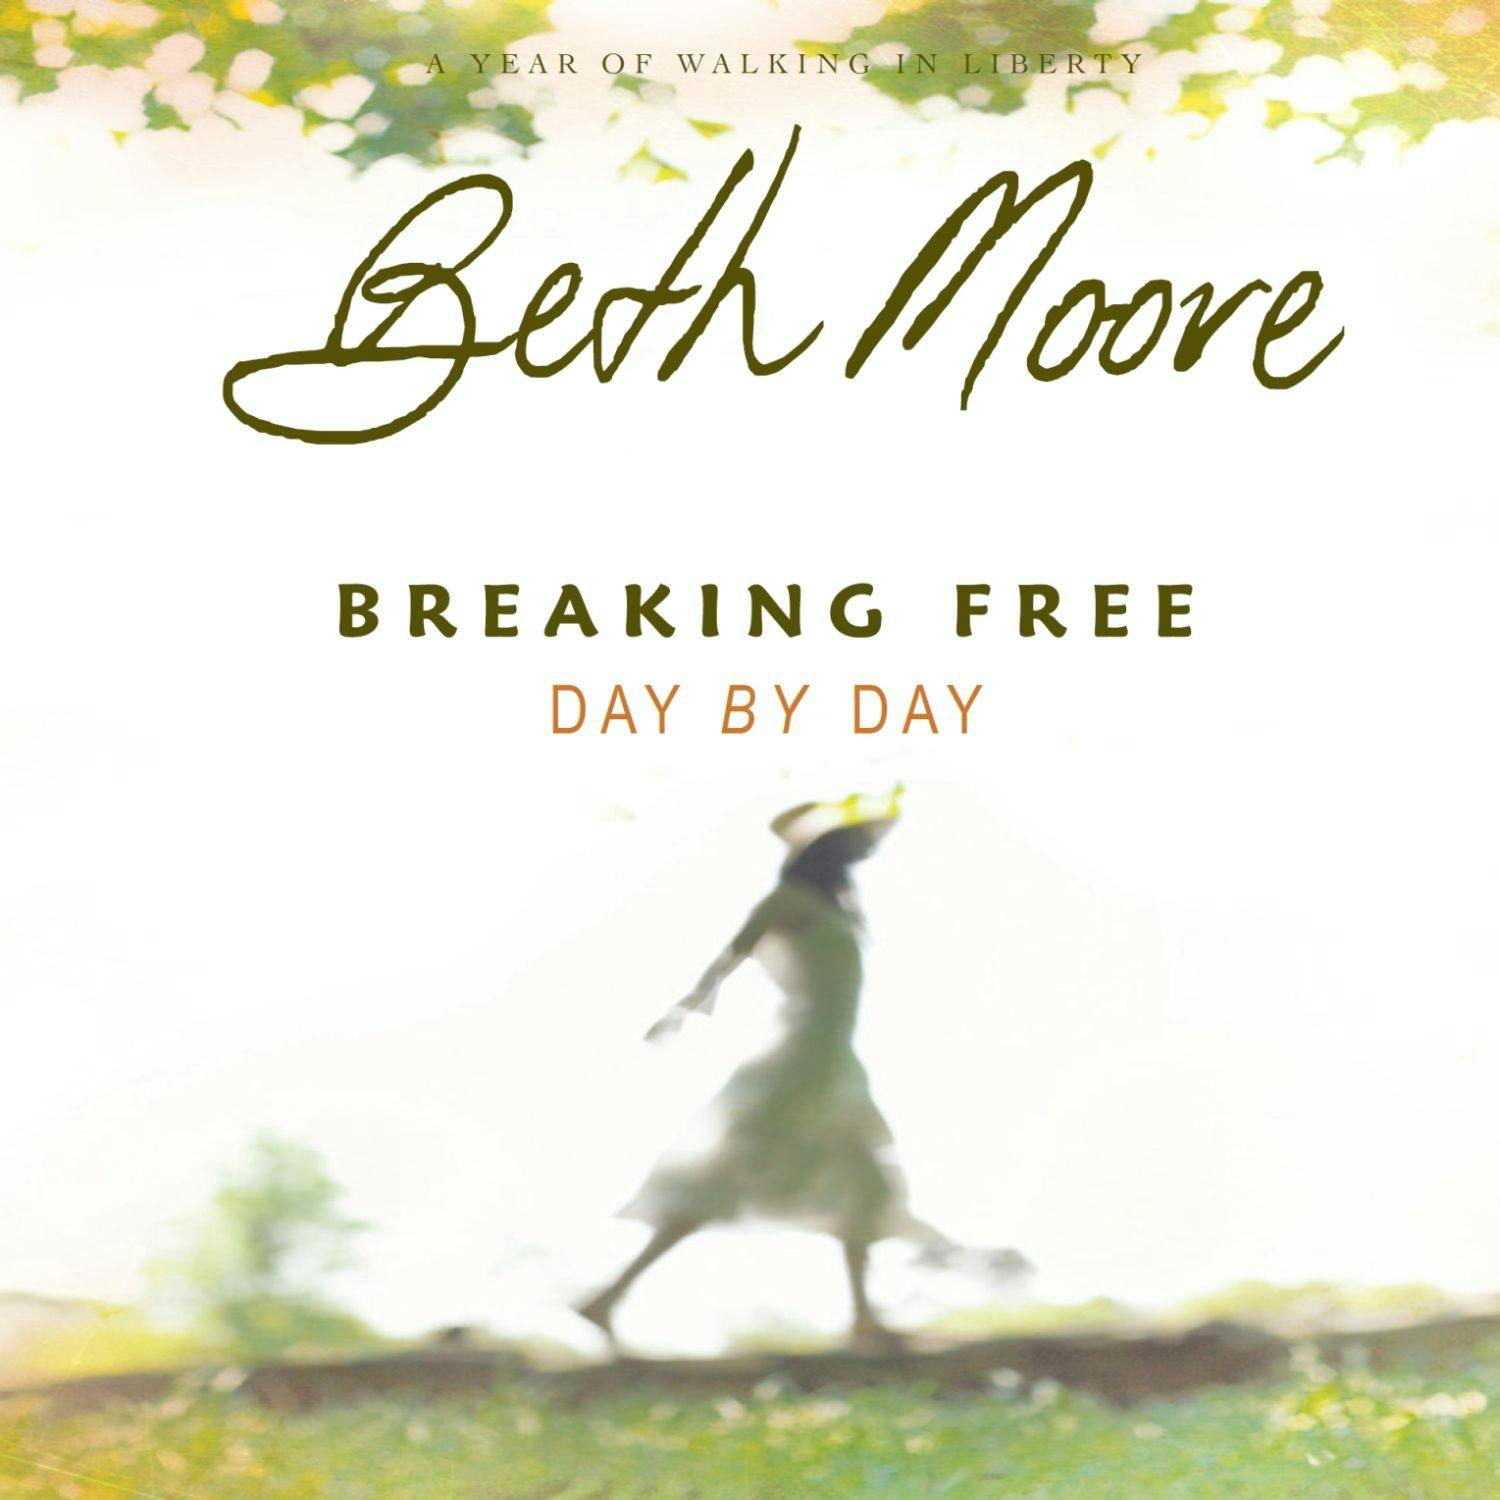 Breaking Free Day by Day: A Year of Walking in Liberty - Beth Moore